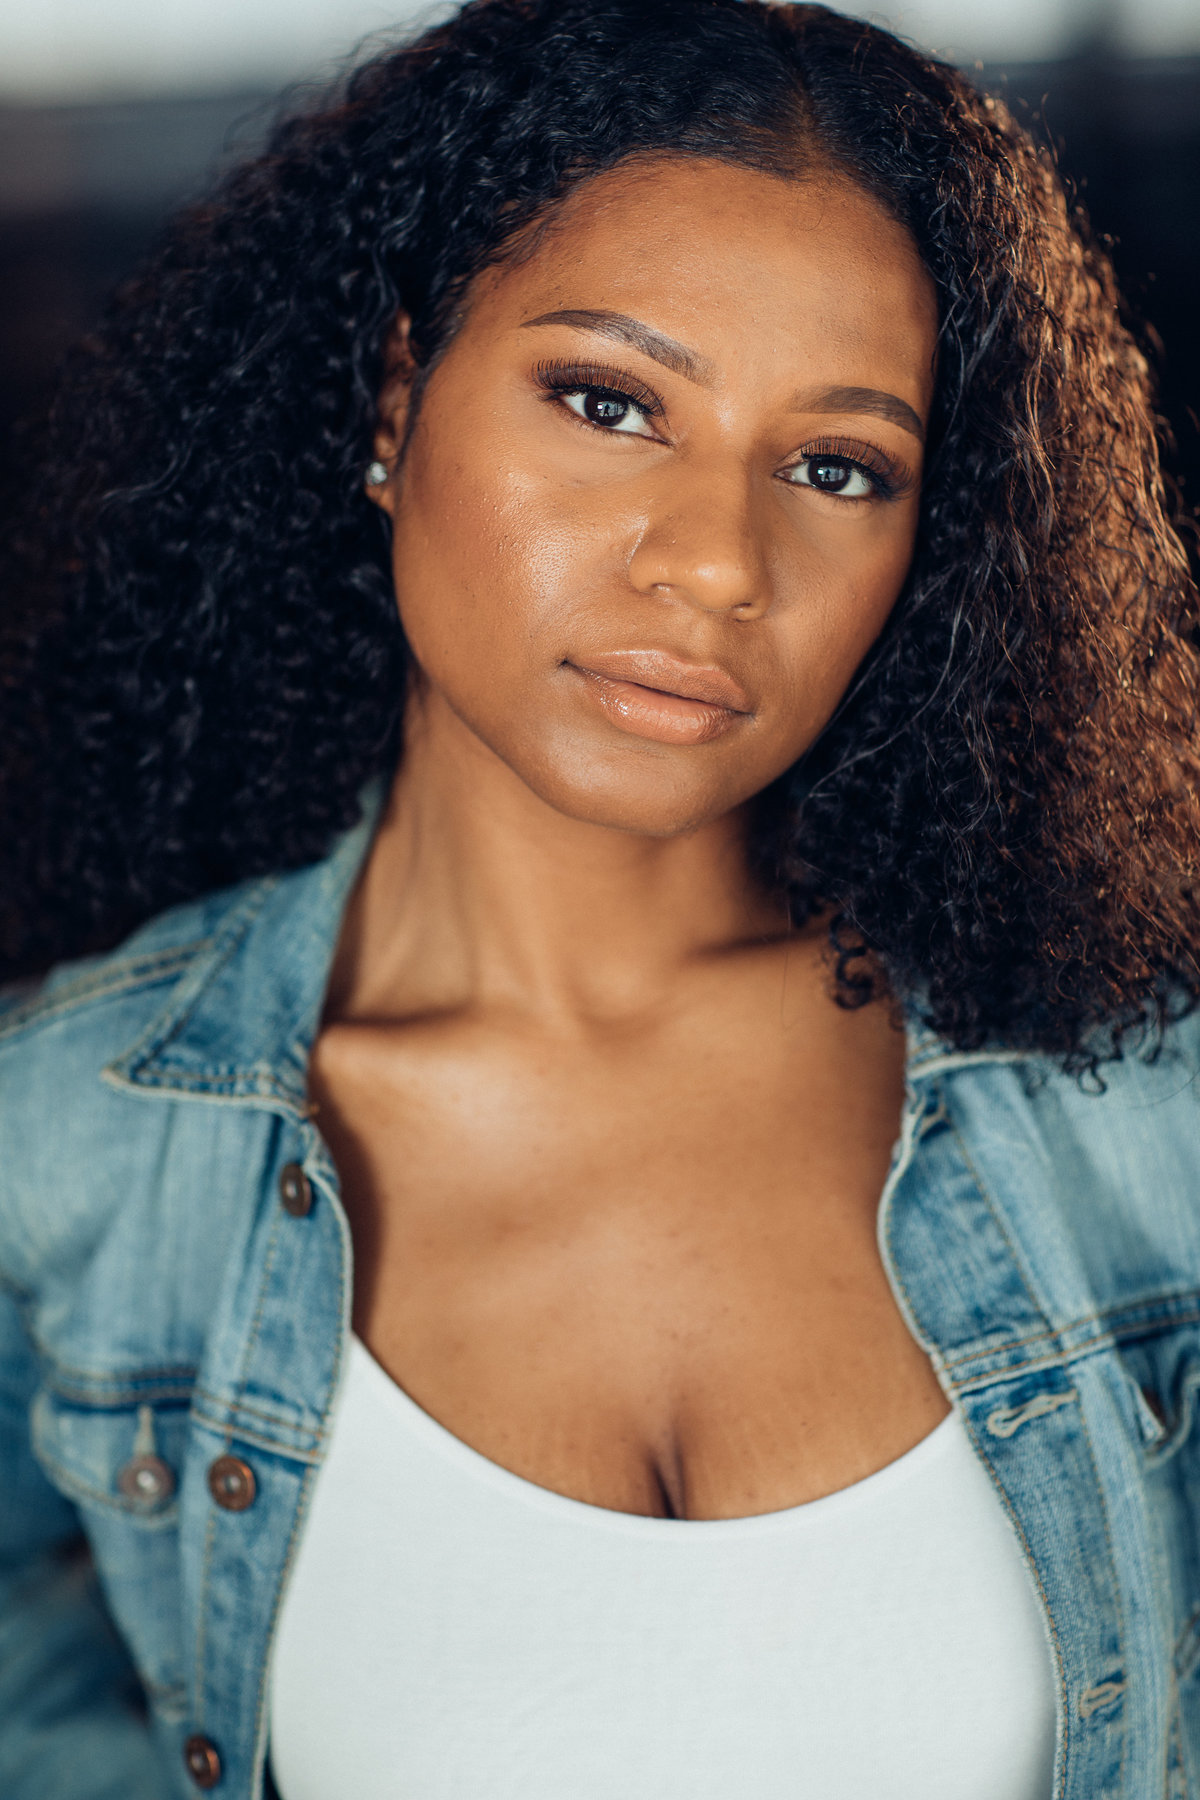 Headshot Photograph Of Young Woman In Faded Blue Denim Jacket And Inner White Tank Top Los Angeles